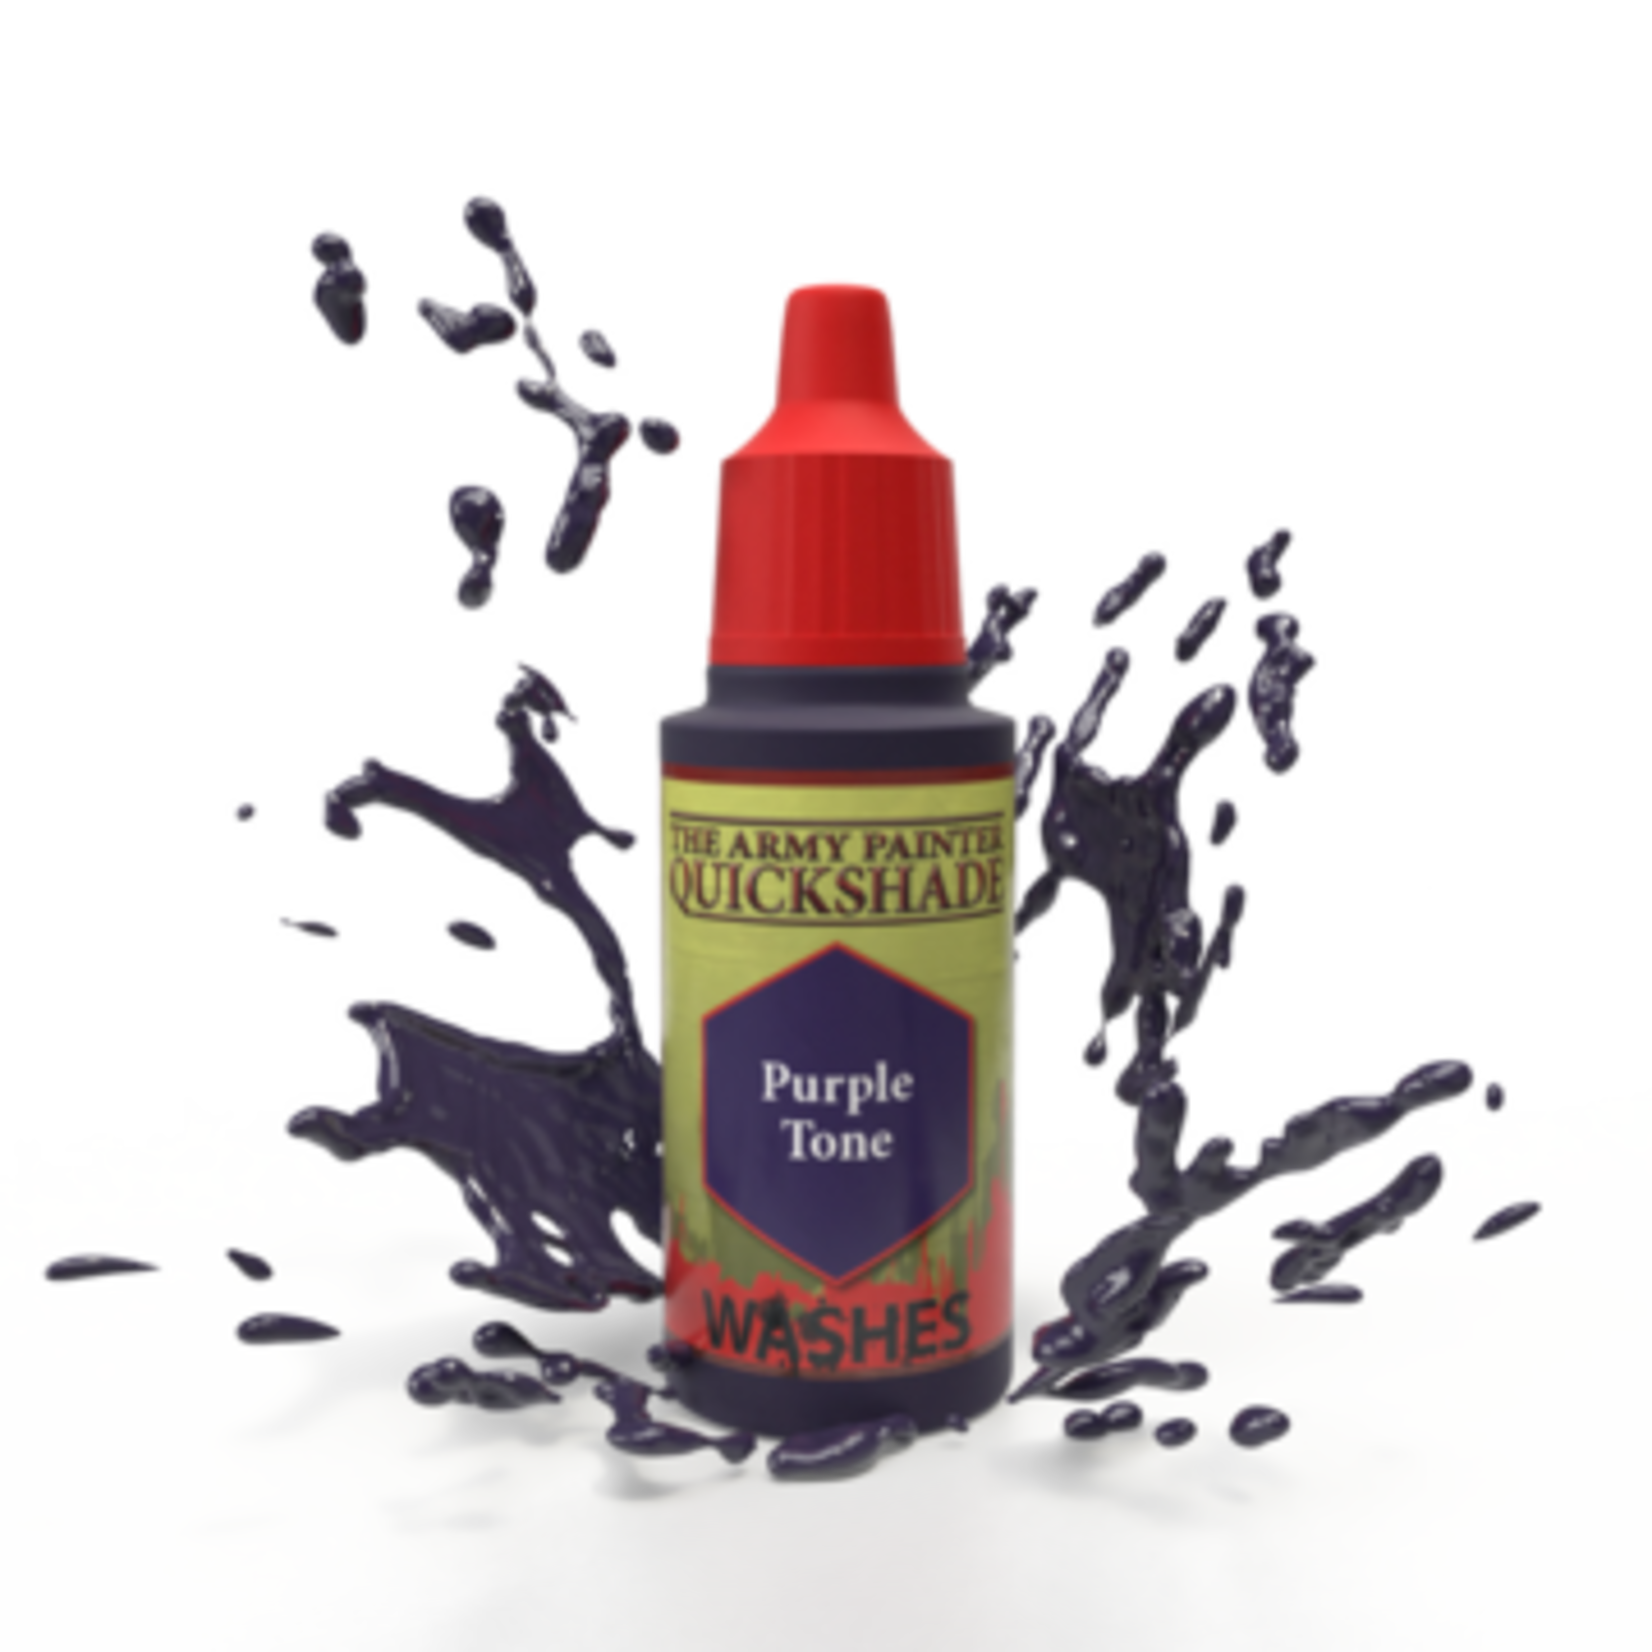 Army Painter Warpaints Quick Shade: Purple Tone Ink 18ml